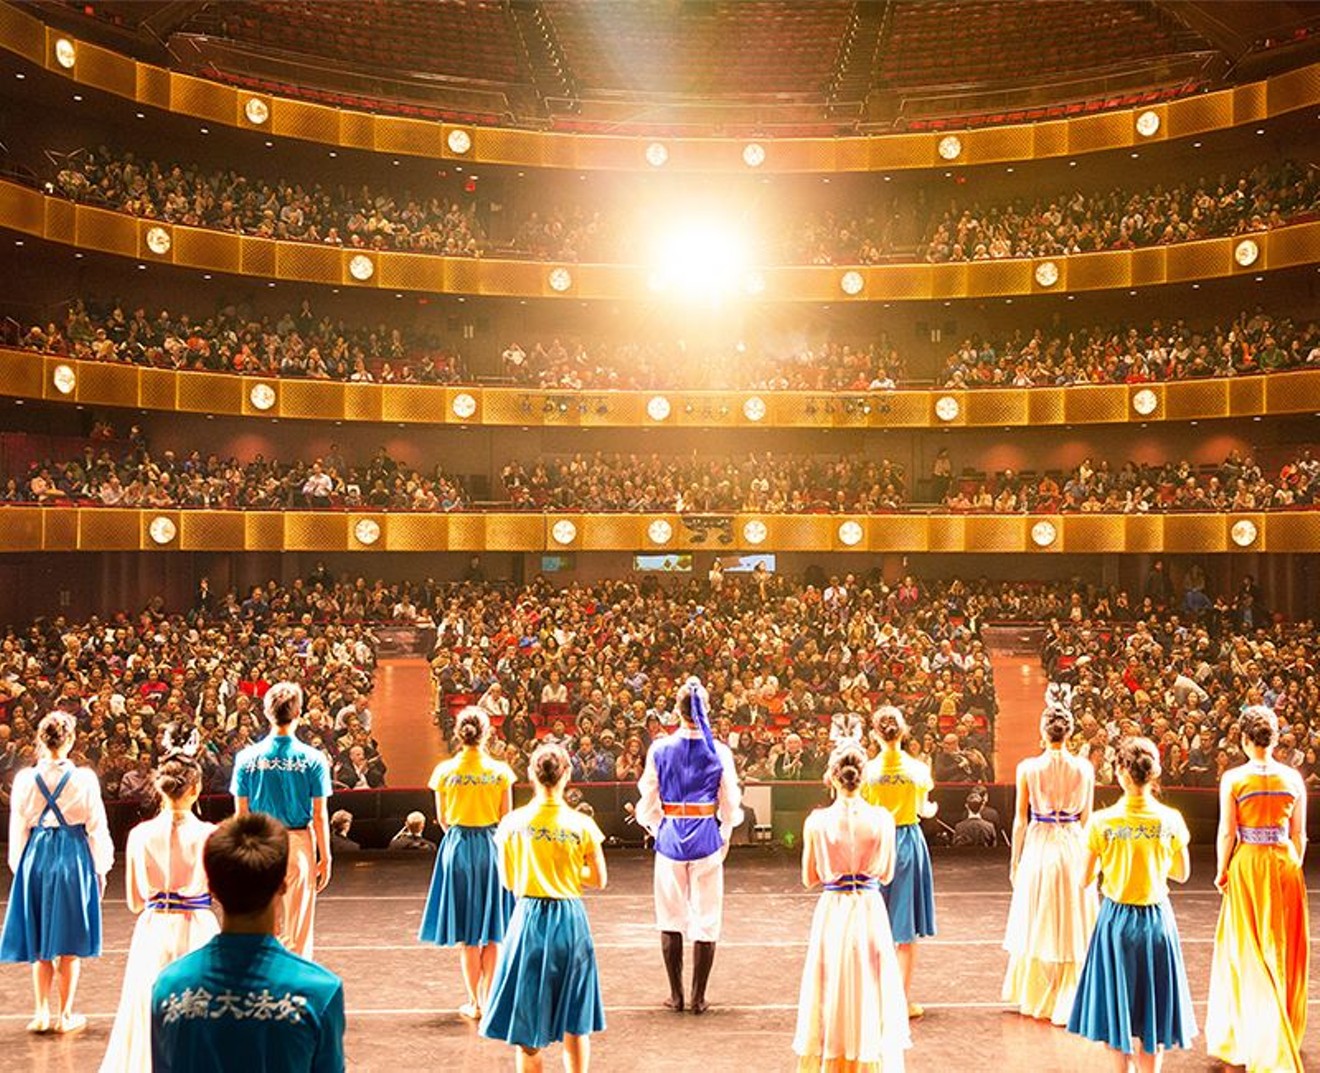 Shen Yun brings its newest interpretation of 5,000 years of Chinese culture to the stage at the Winspear Opera House Saturday.